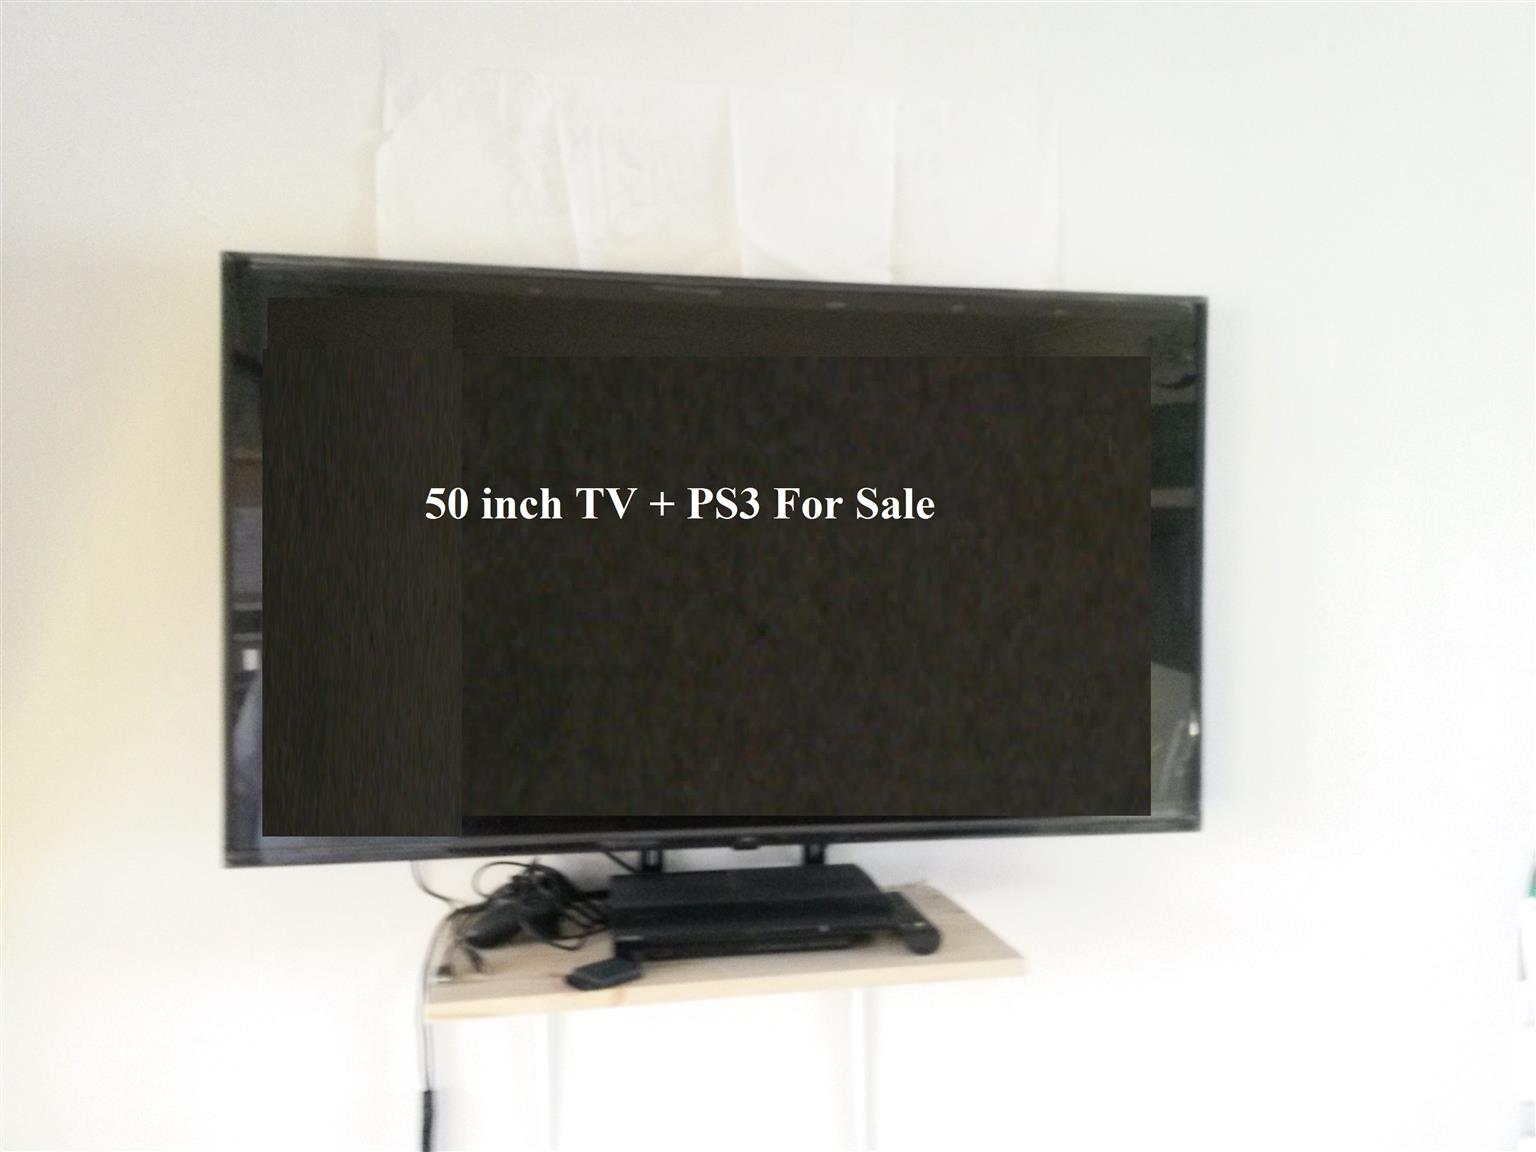 AIM 50 inch LED TV + PS3 For Sale